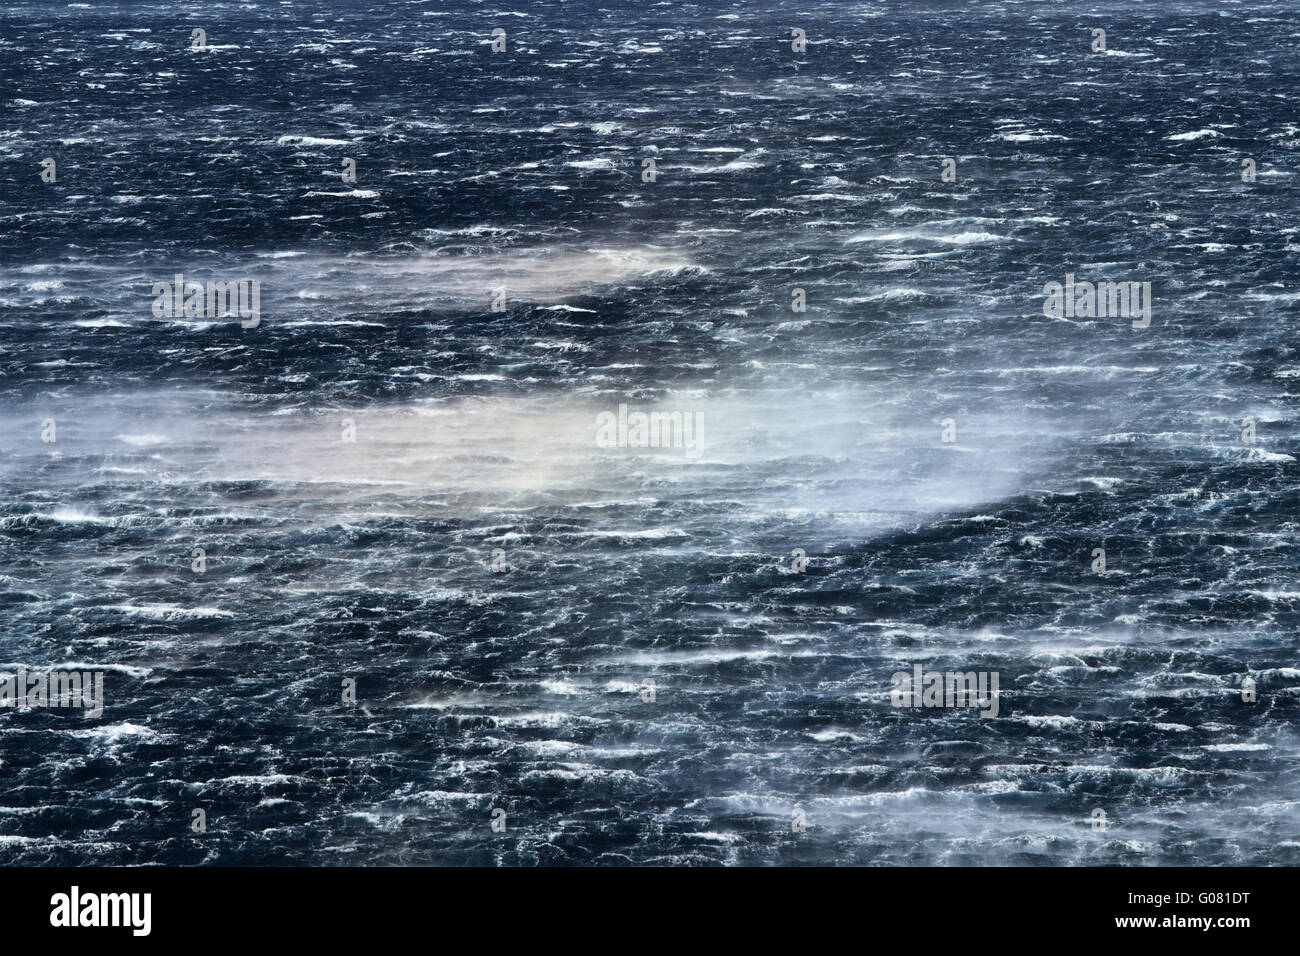 Raging sea with furious waves and fierce wind Stock Photo